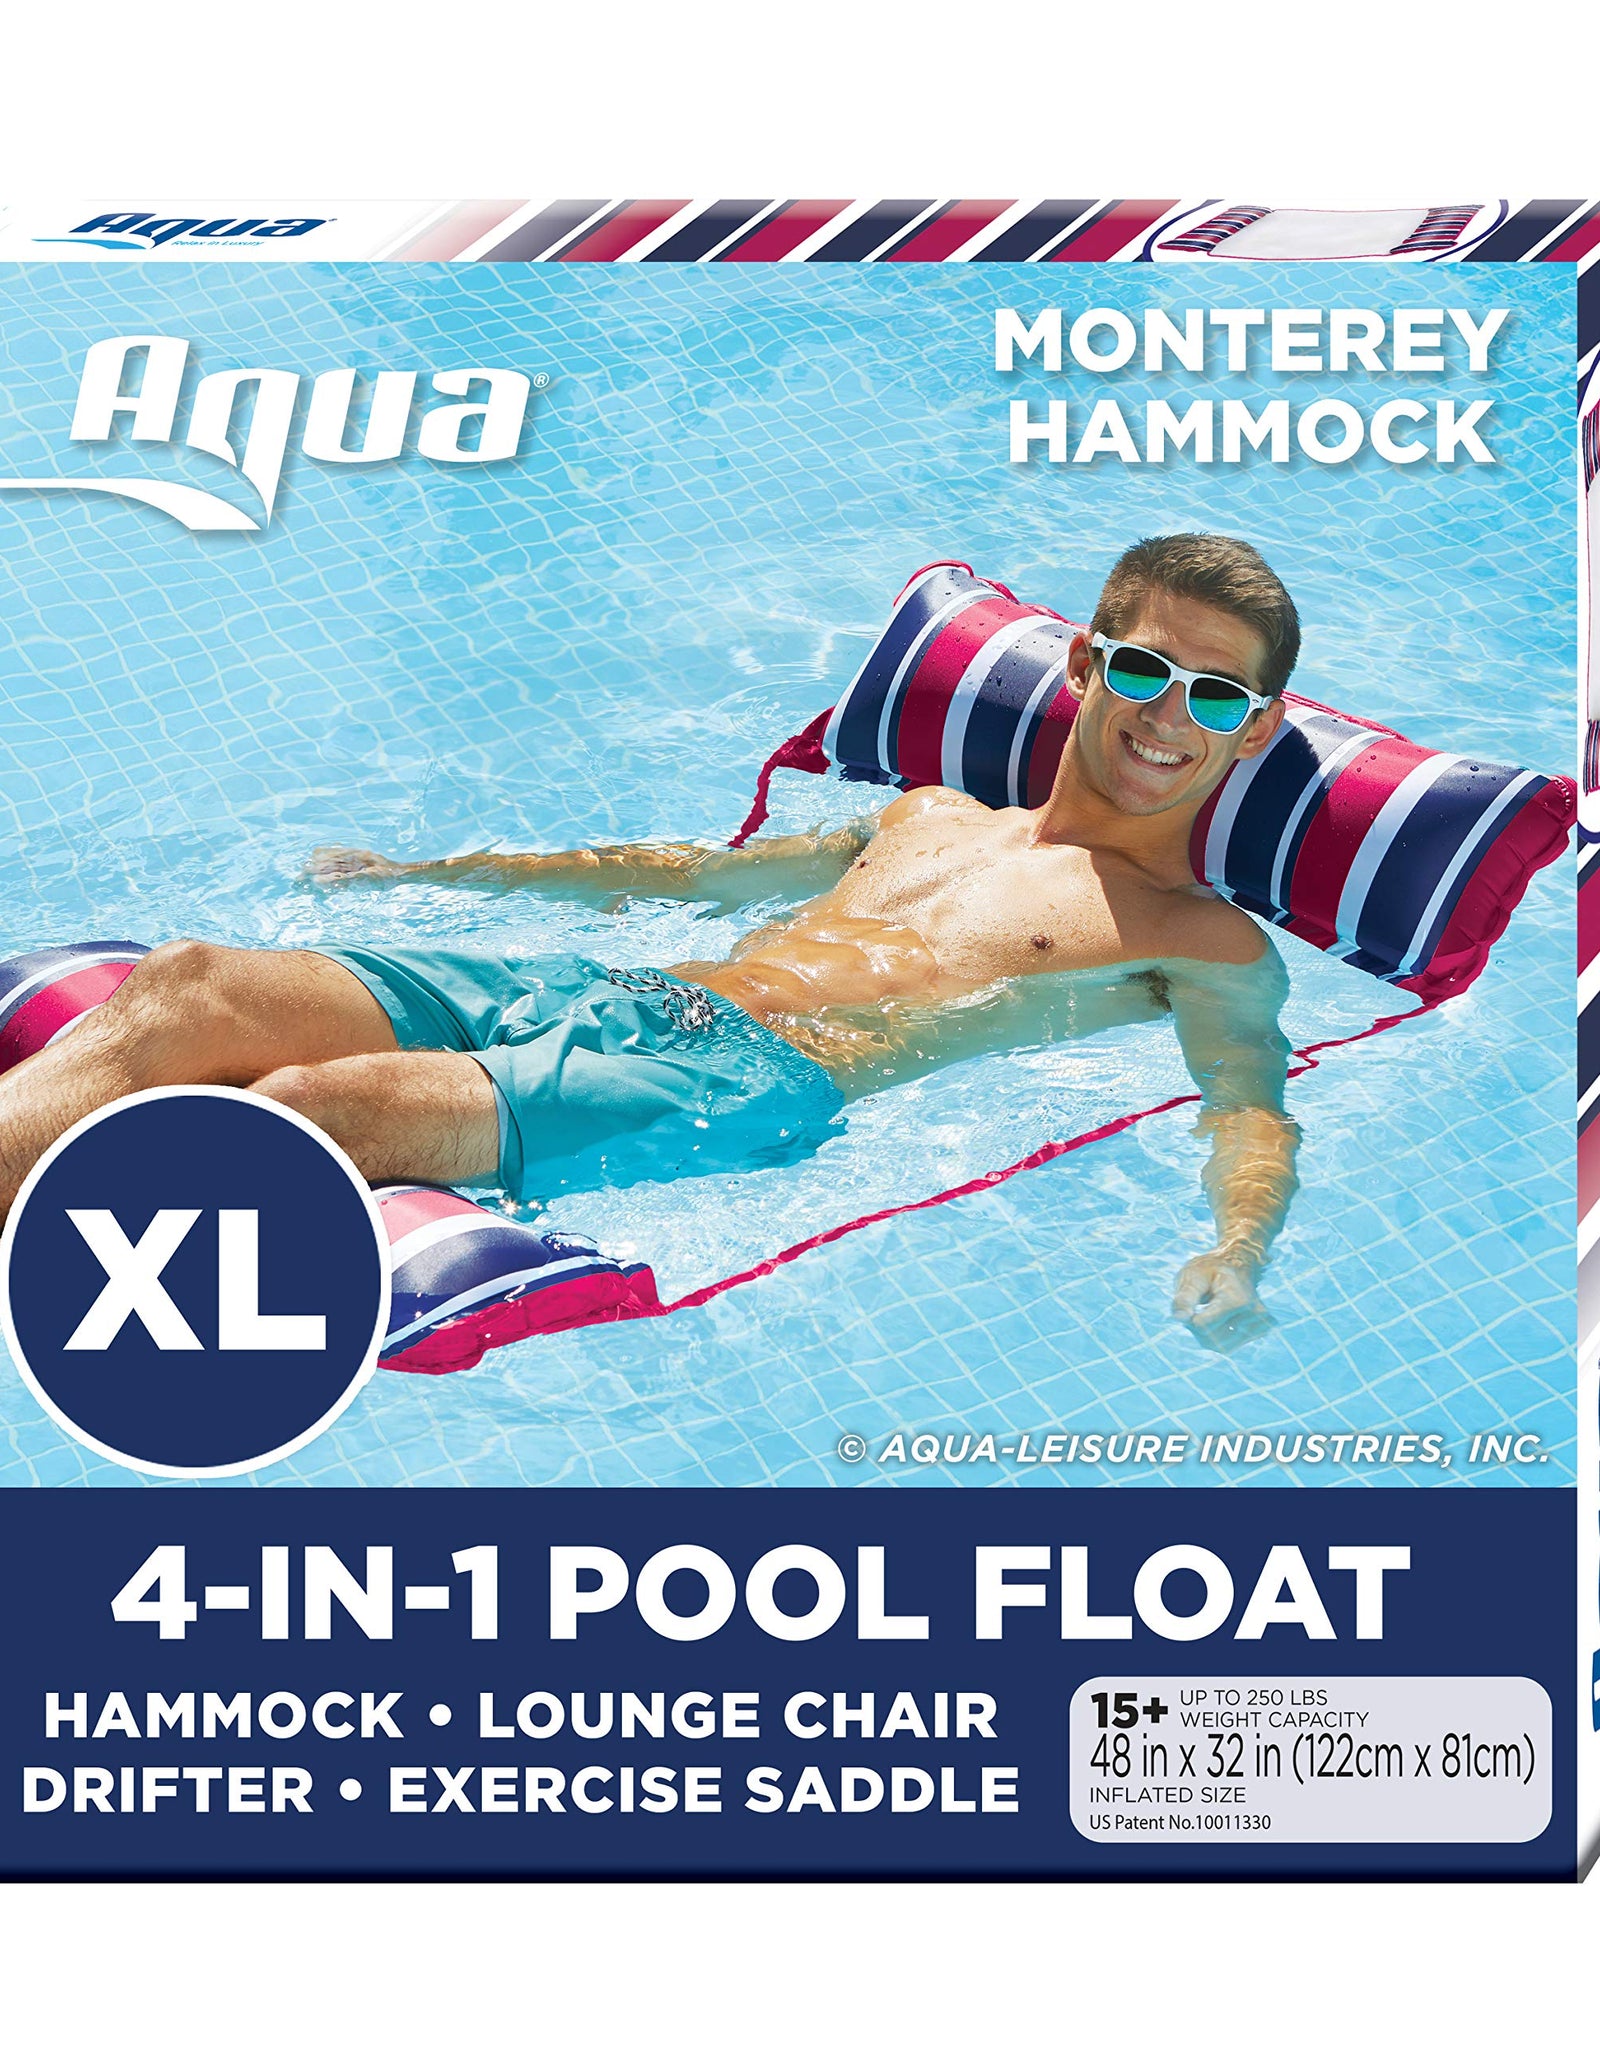 Aqua 4-in-1 Monterey Pool Hammock & Float, 50% Thicker, Patented Non-Stick PVC, Multi-Purpose Water Hammock (Saddle, Chair, Hammock, Drifter) Pool Chair for Adults - Navy